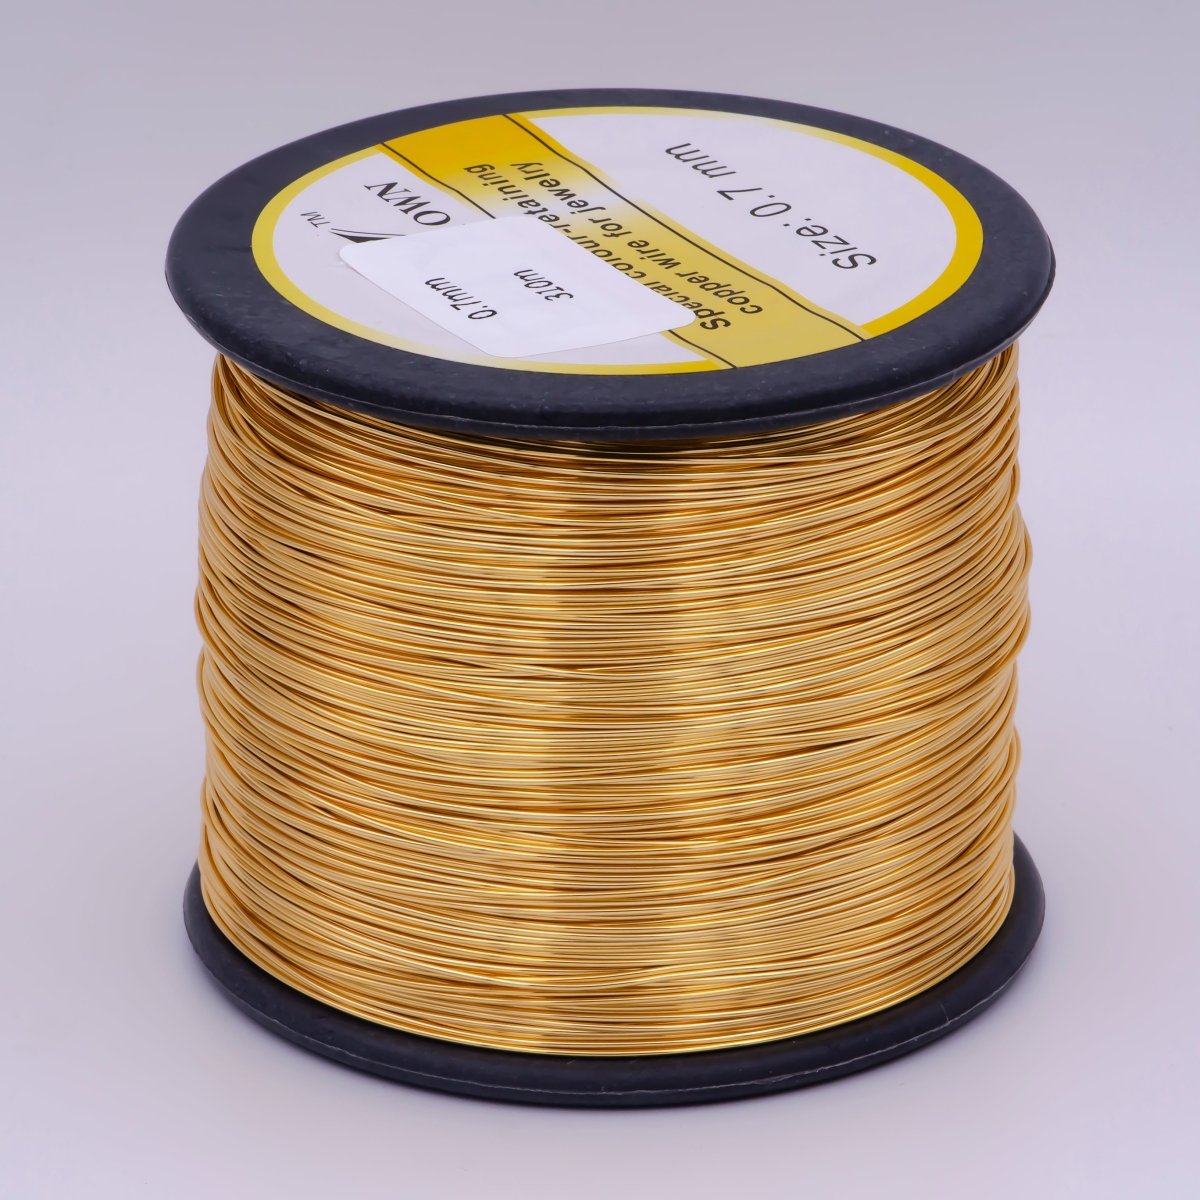 24k Gold Plated Wire with Copper Core - 1 spool- You Pick Gauge 18, 20, 21, 22, 24, 26, 28 - 100% Guarantee - DLUXCA